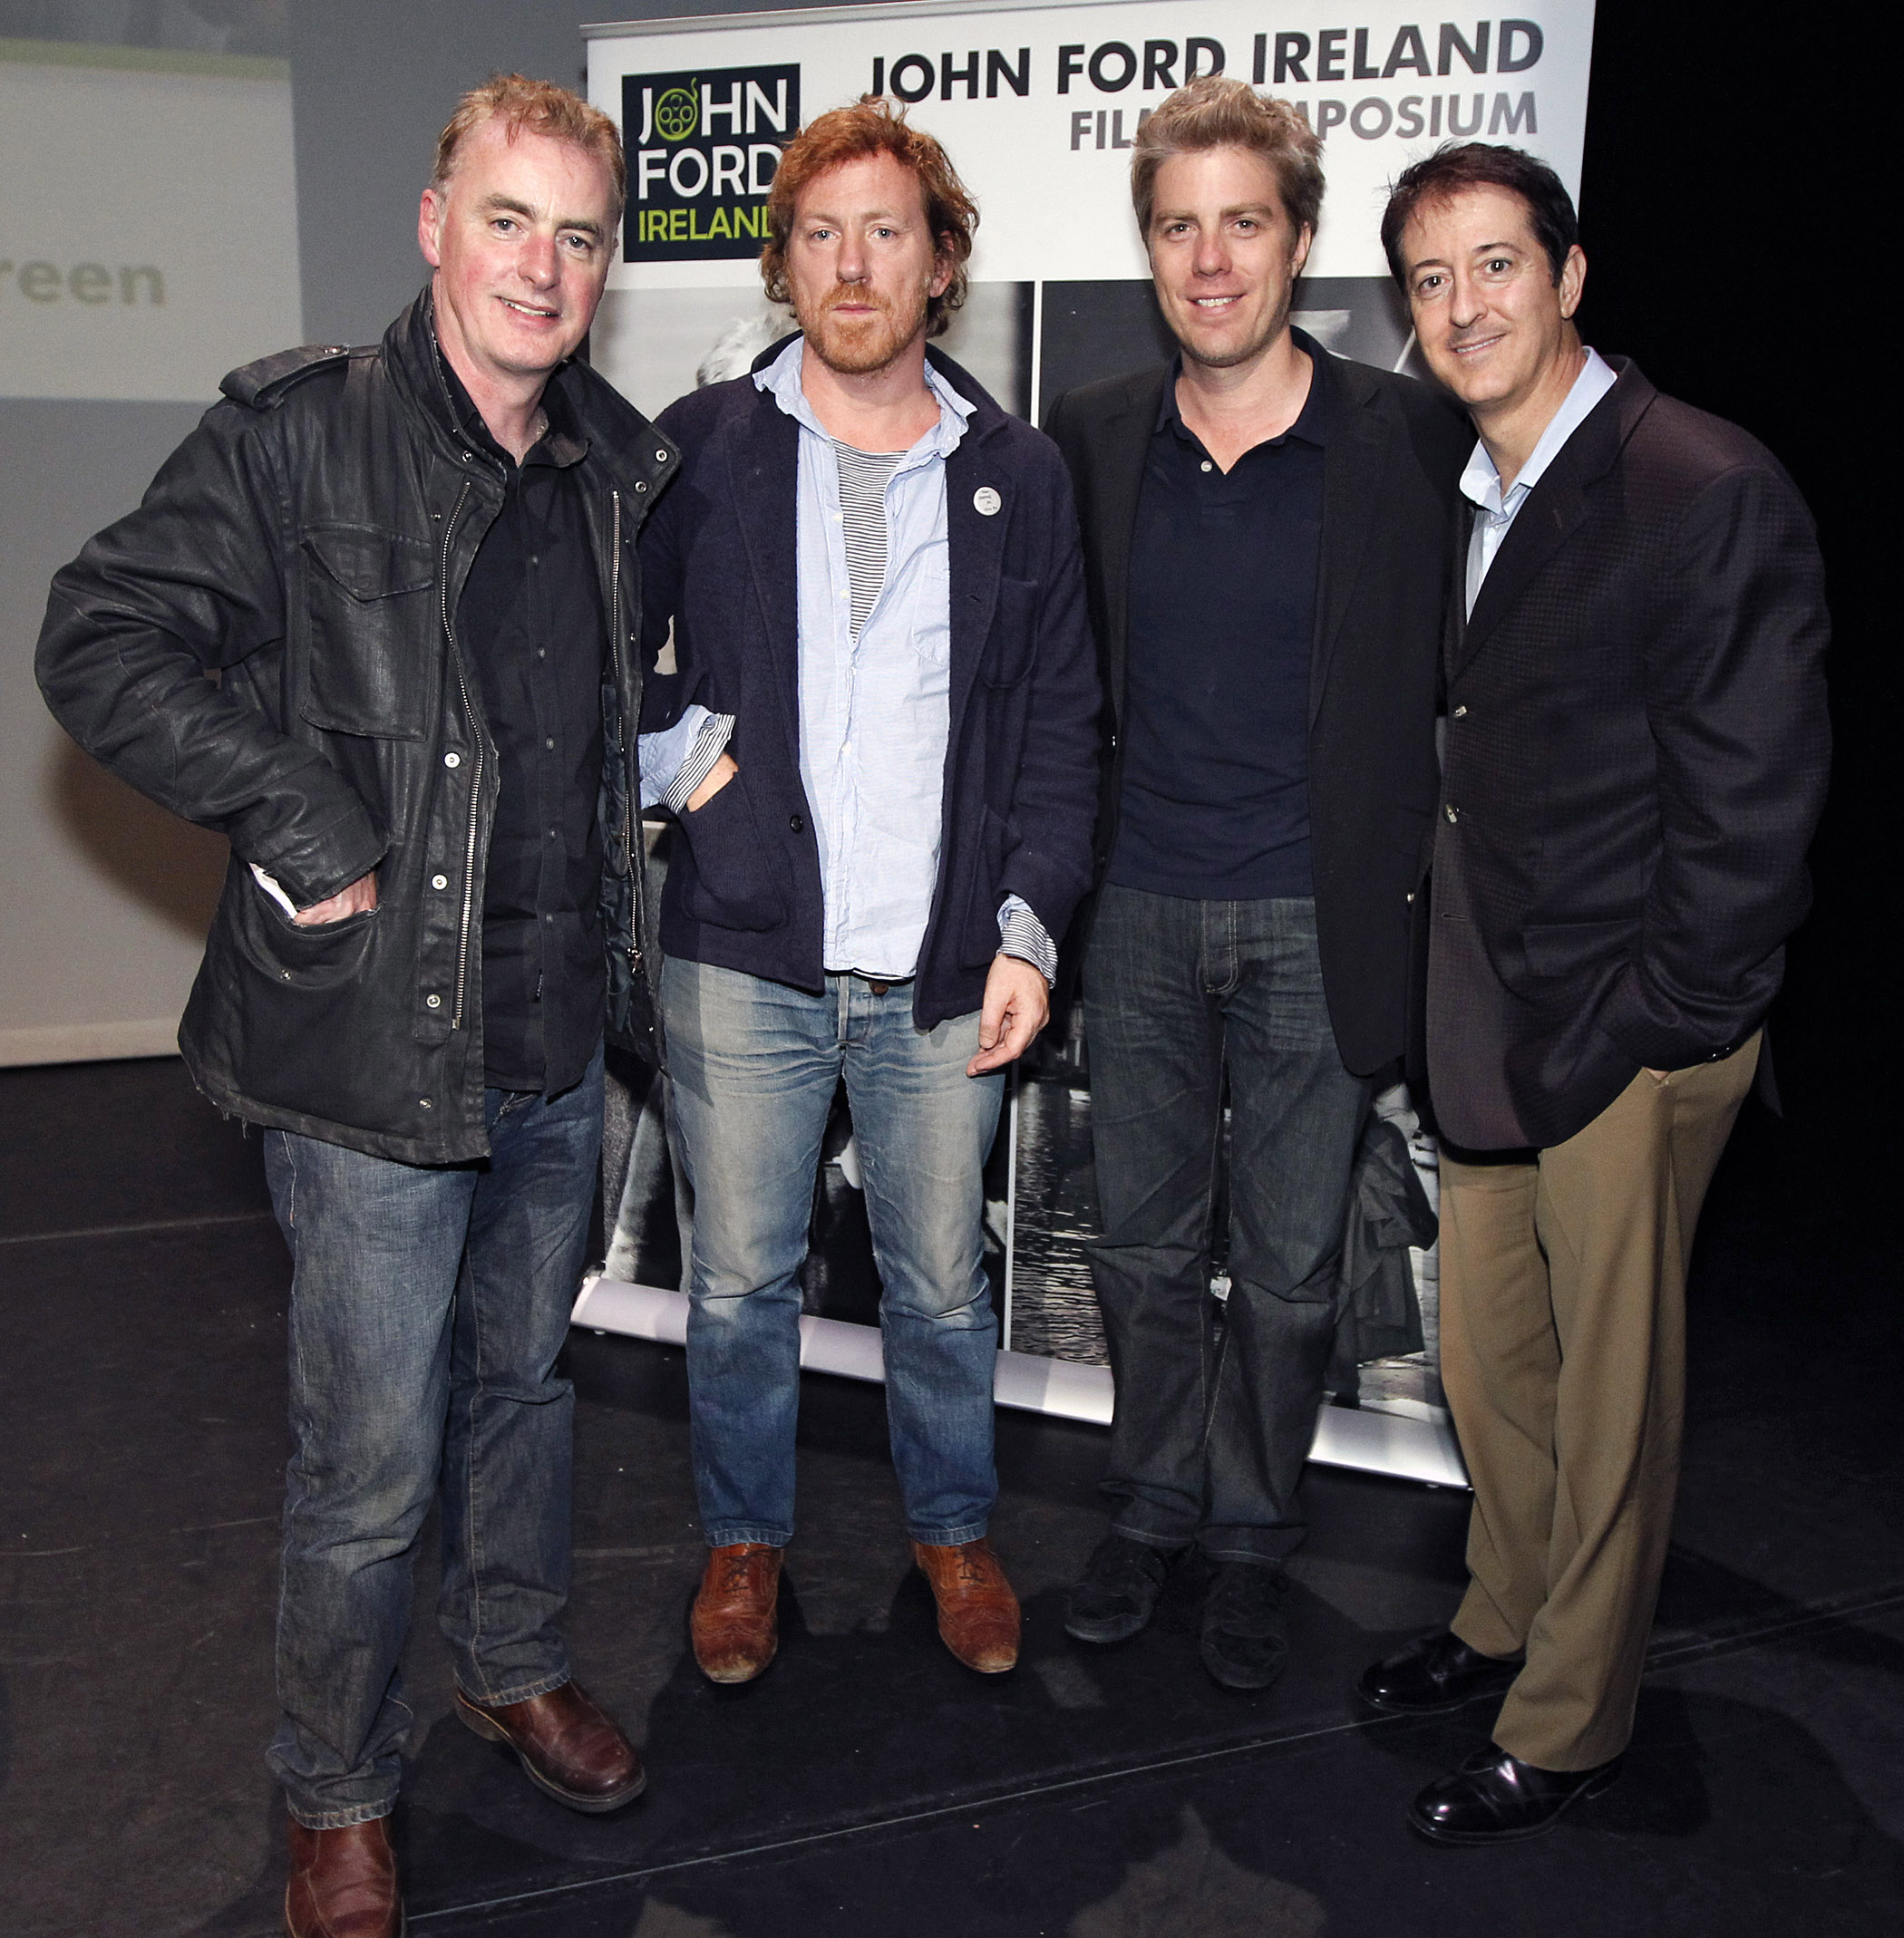 Dave Fanning, David Holmes, Kyle Eastwood &Amp; Christopher Caliendo Were Pictured At The Music For The Screen Workshop, At The Project Arts Centre, Dublin, As Part Of The 1St John Ford Ireland Film Symposium, On 9Th  June 2012. Www.johnfordireland.org For Full Programme Information And Tickets.
Copyright Notice: